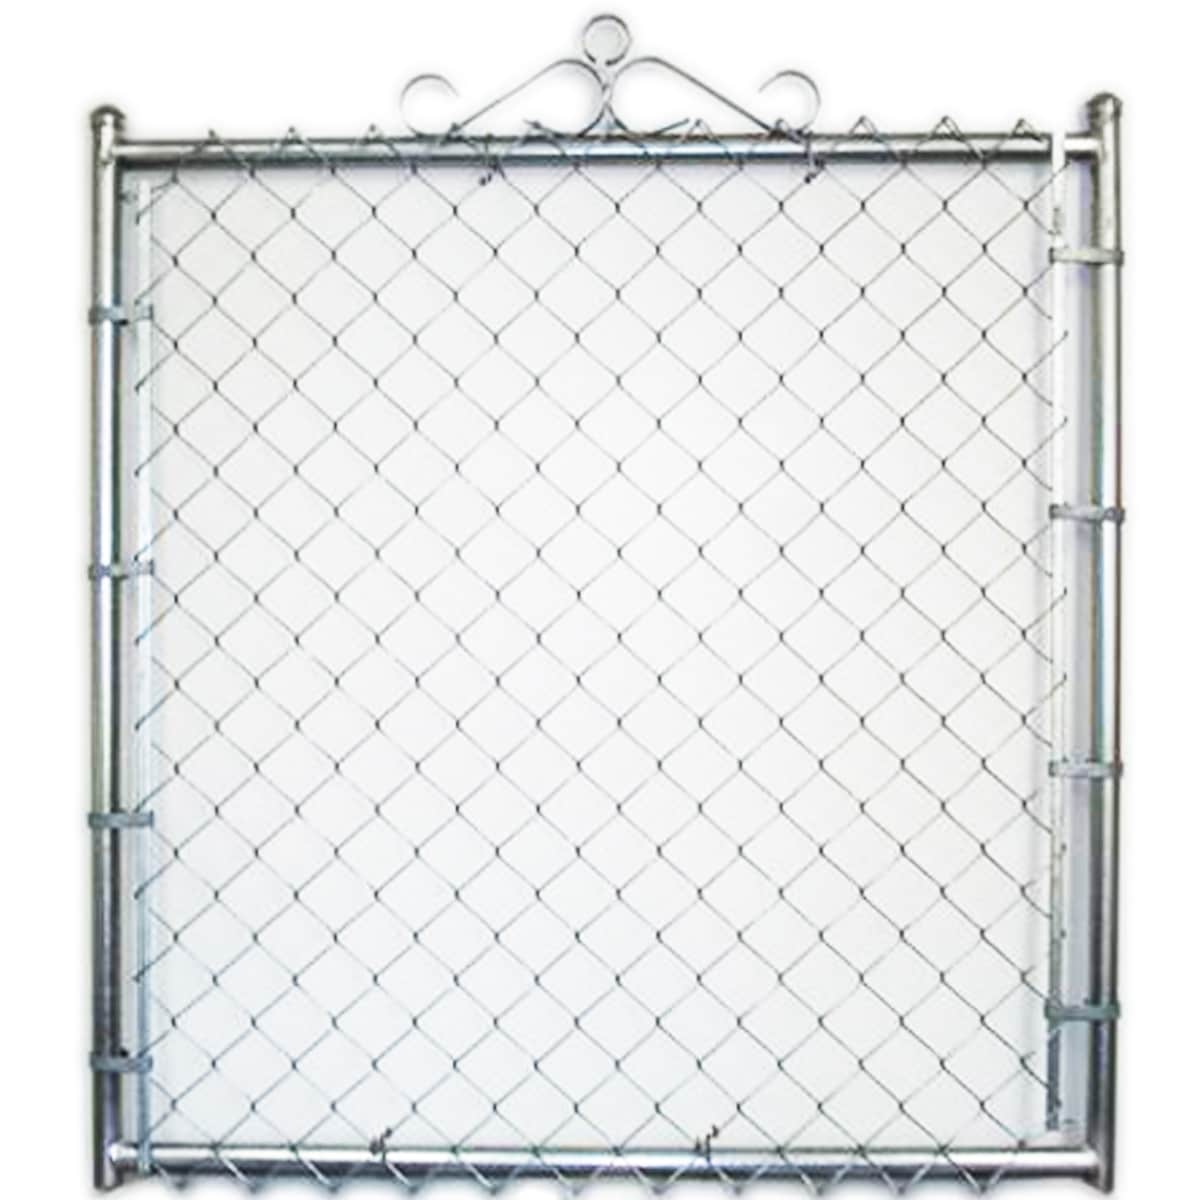 Everbilt 5 ft. L x 36-inch H 19-Gauge Welded Wire Galvanized Steel Netting  Fence with 1/2